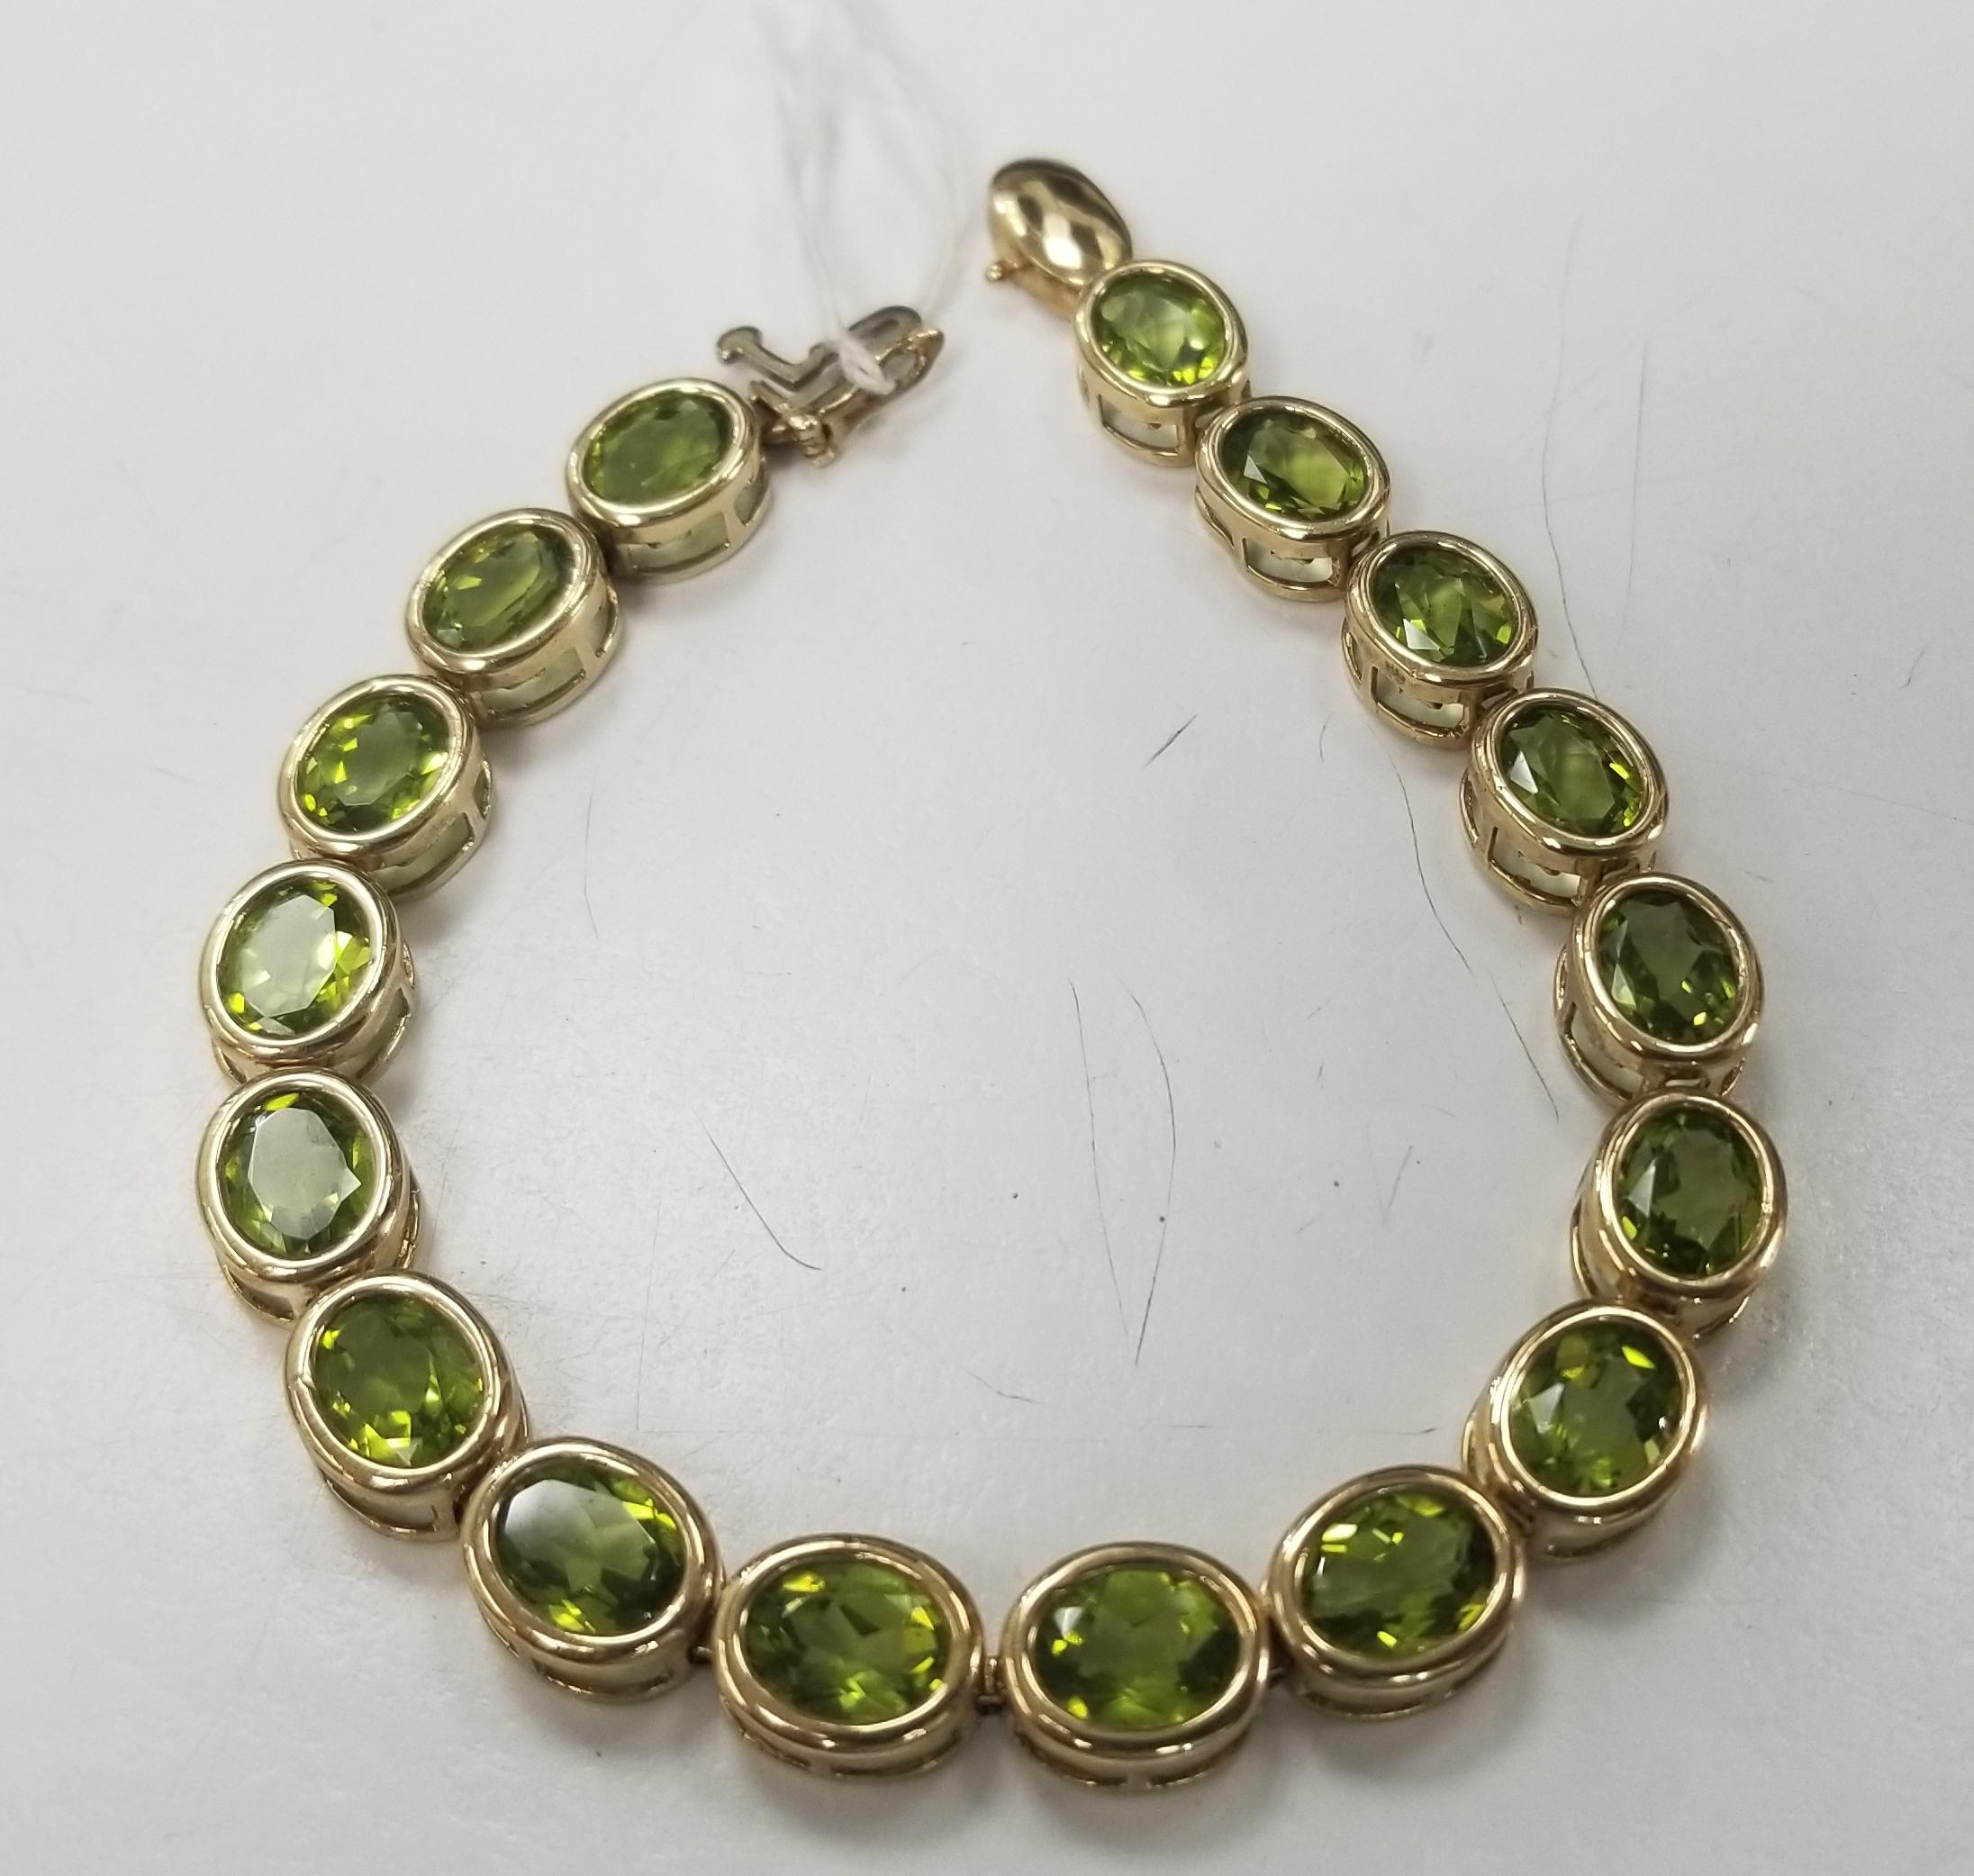 10k yellow gold peridot bezel bracelet, containing 17 oval cut peridot of gem quality weighing 17.00cts. measuring 7 inches with clasp and safety. 